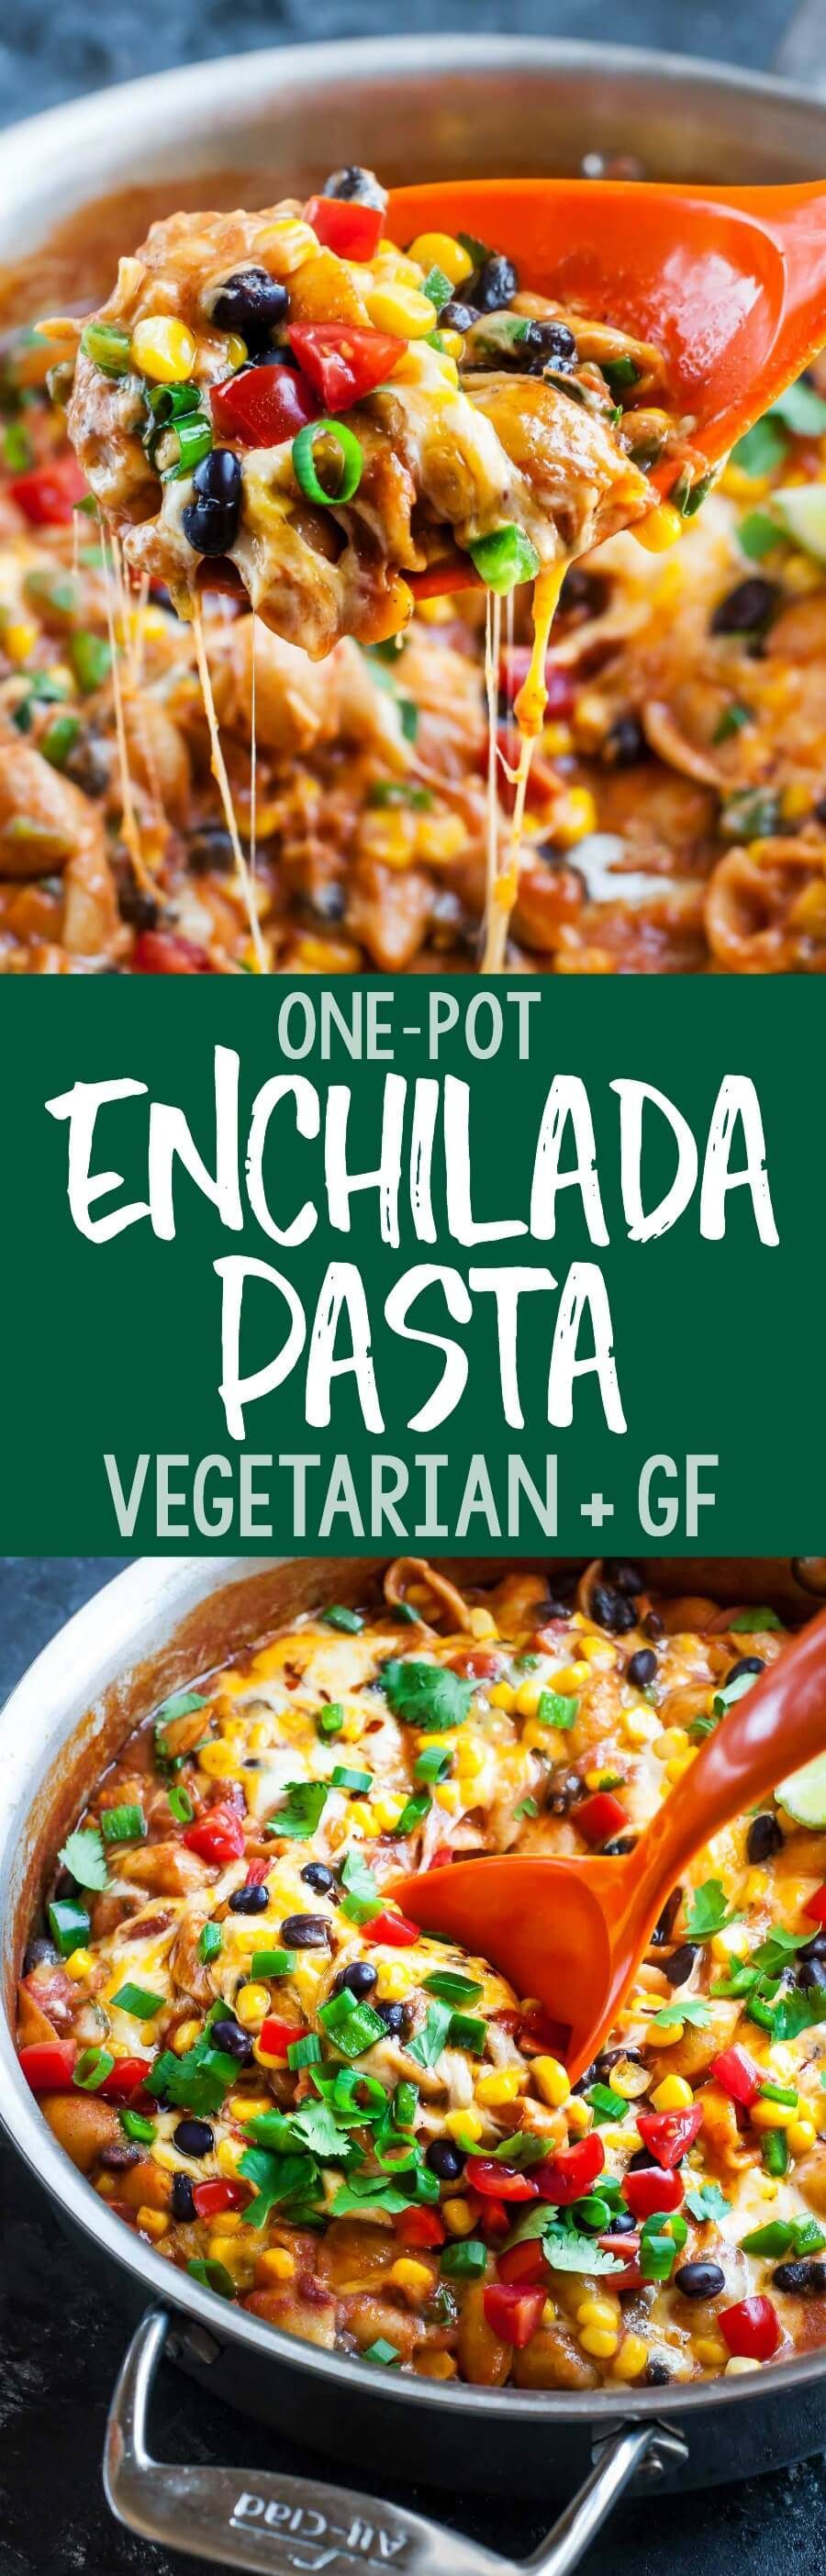 Healthy Gluten-Free One-Pot Enchilada Pasta – Made with gluten-free Chickapea Pasta, tasty vegetarian dish is quick, easy, and